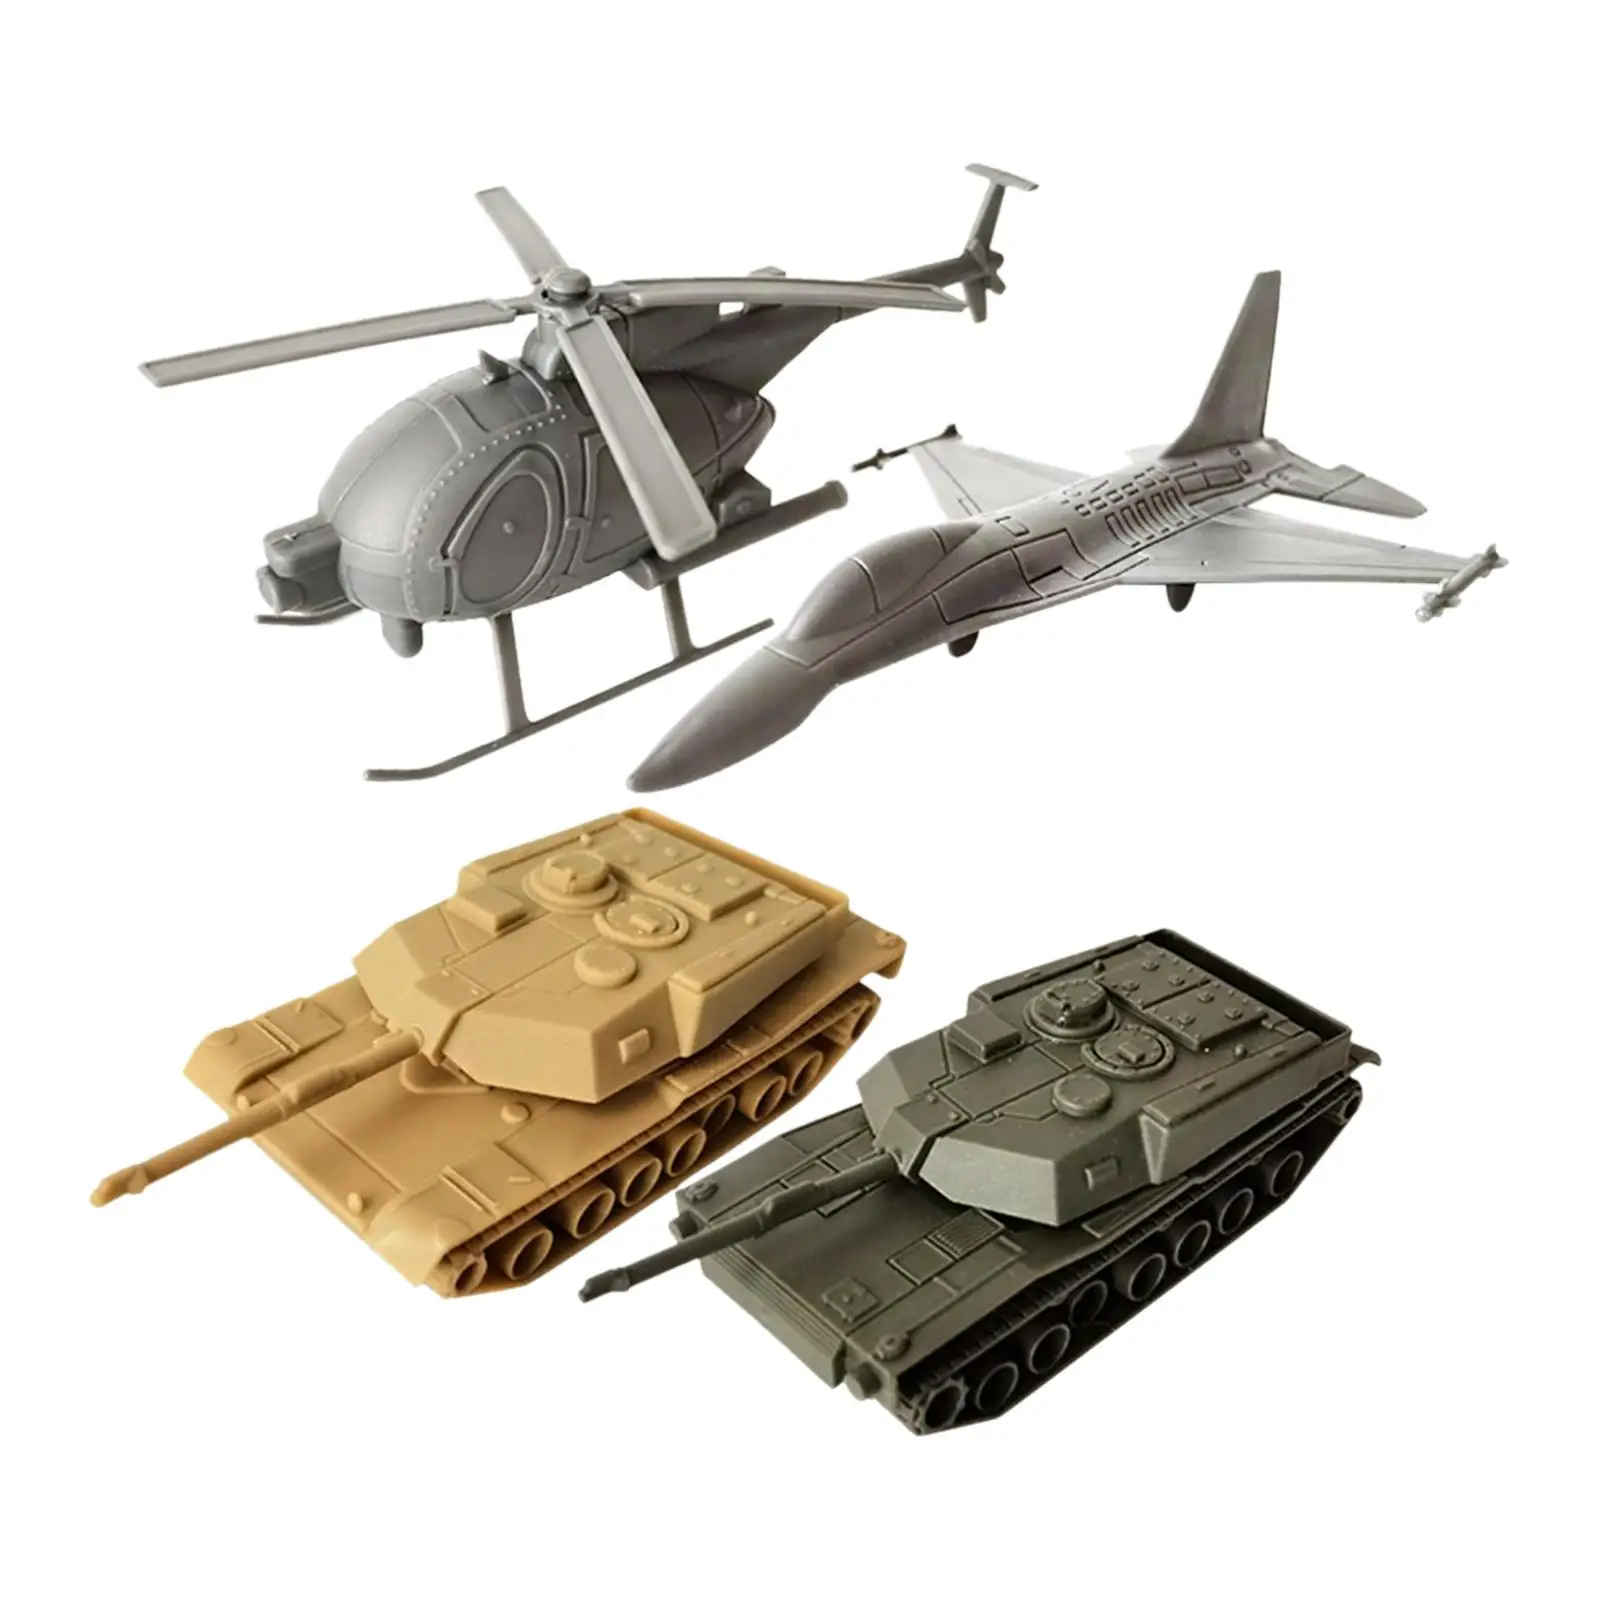 4x 3D Puzzles Helicopter and Fighter Display for Gift Education Toy Children